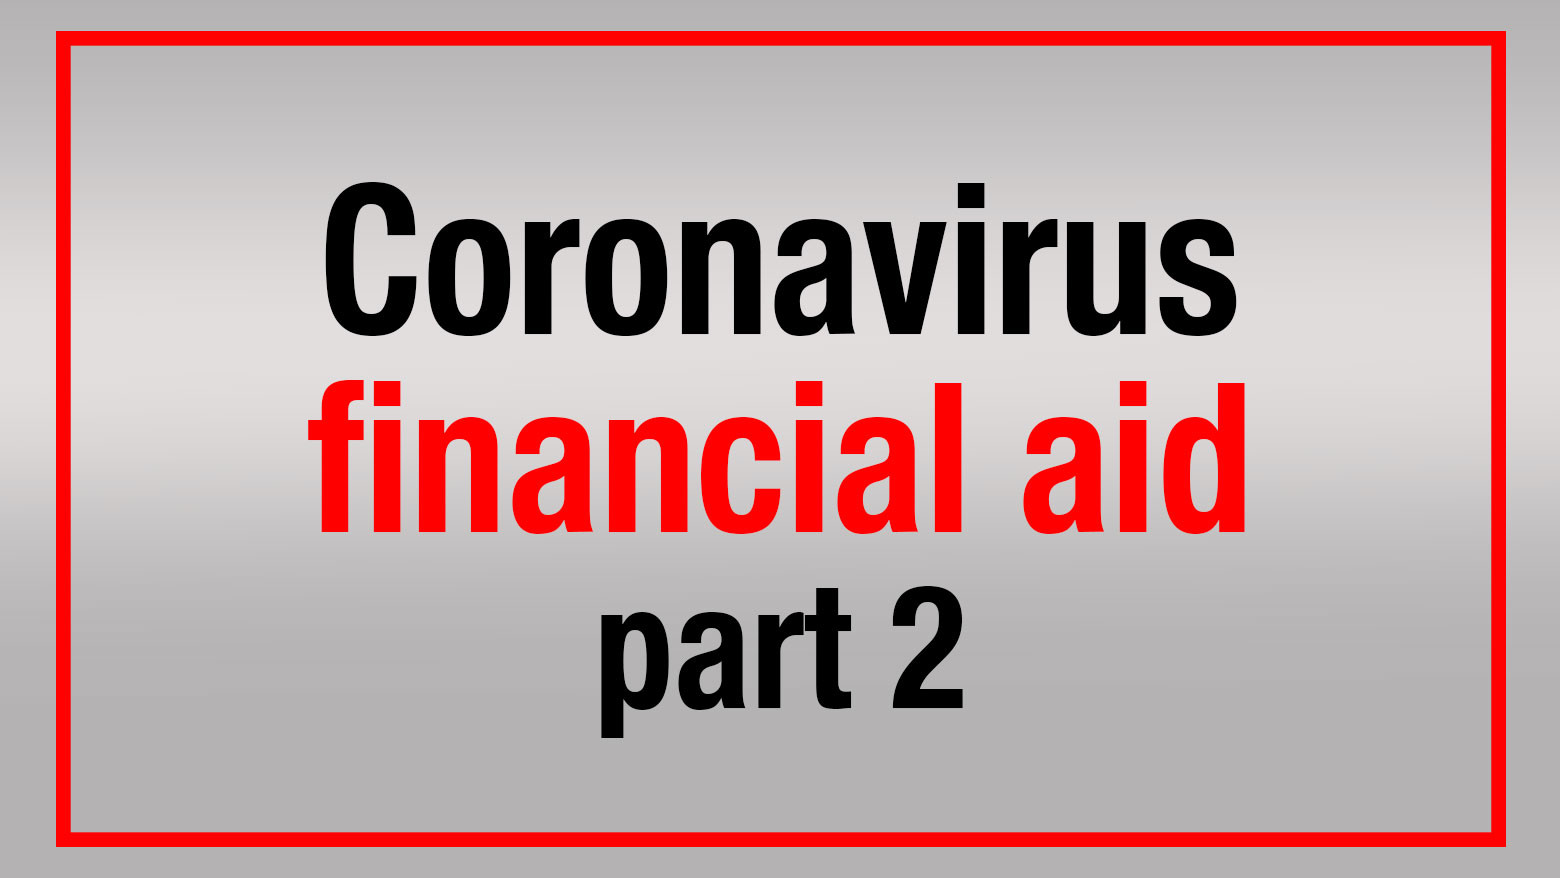 If you are having trouble with money or your job amid the coronavirus crisis